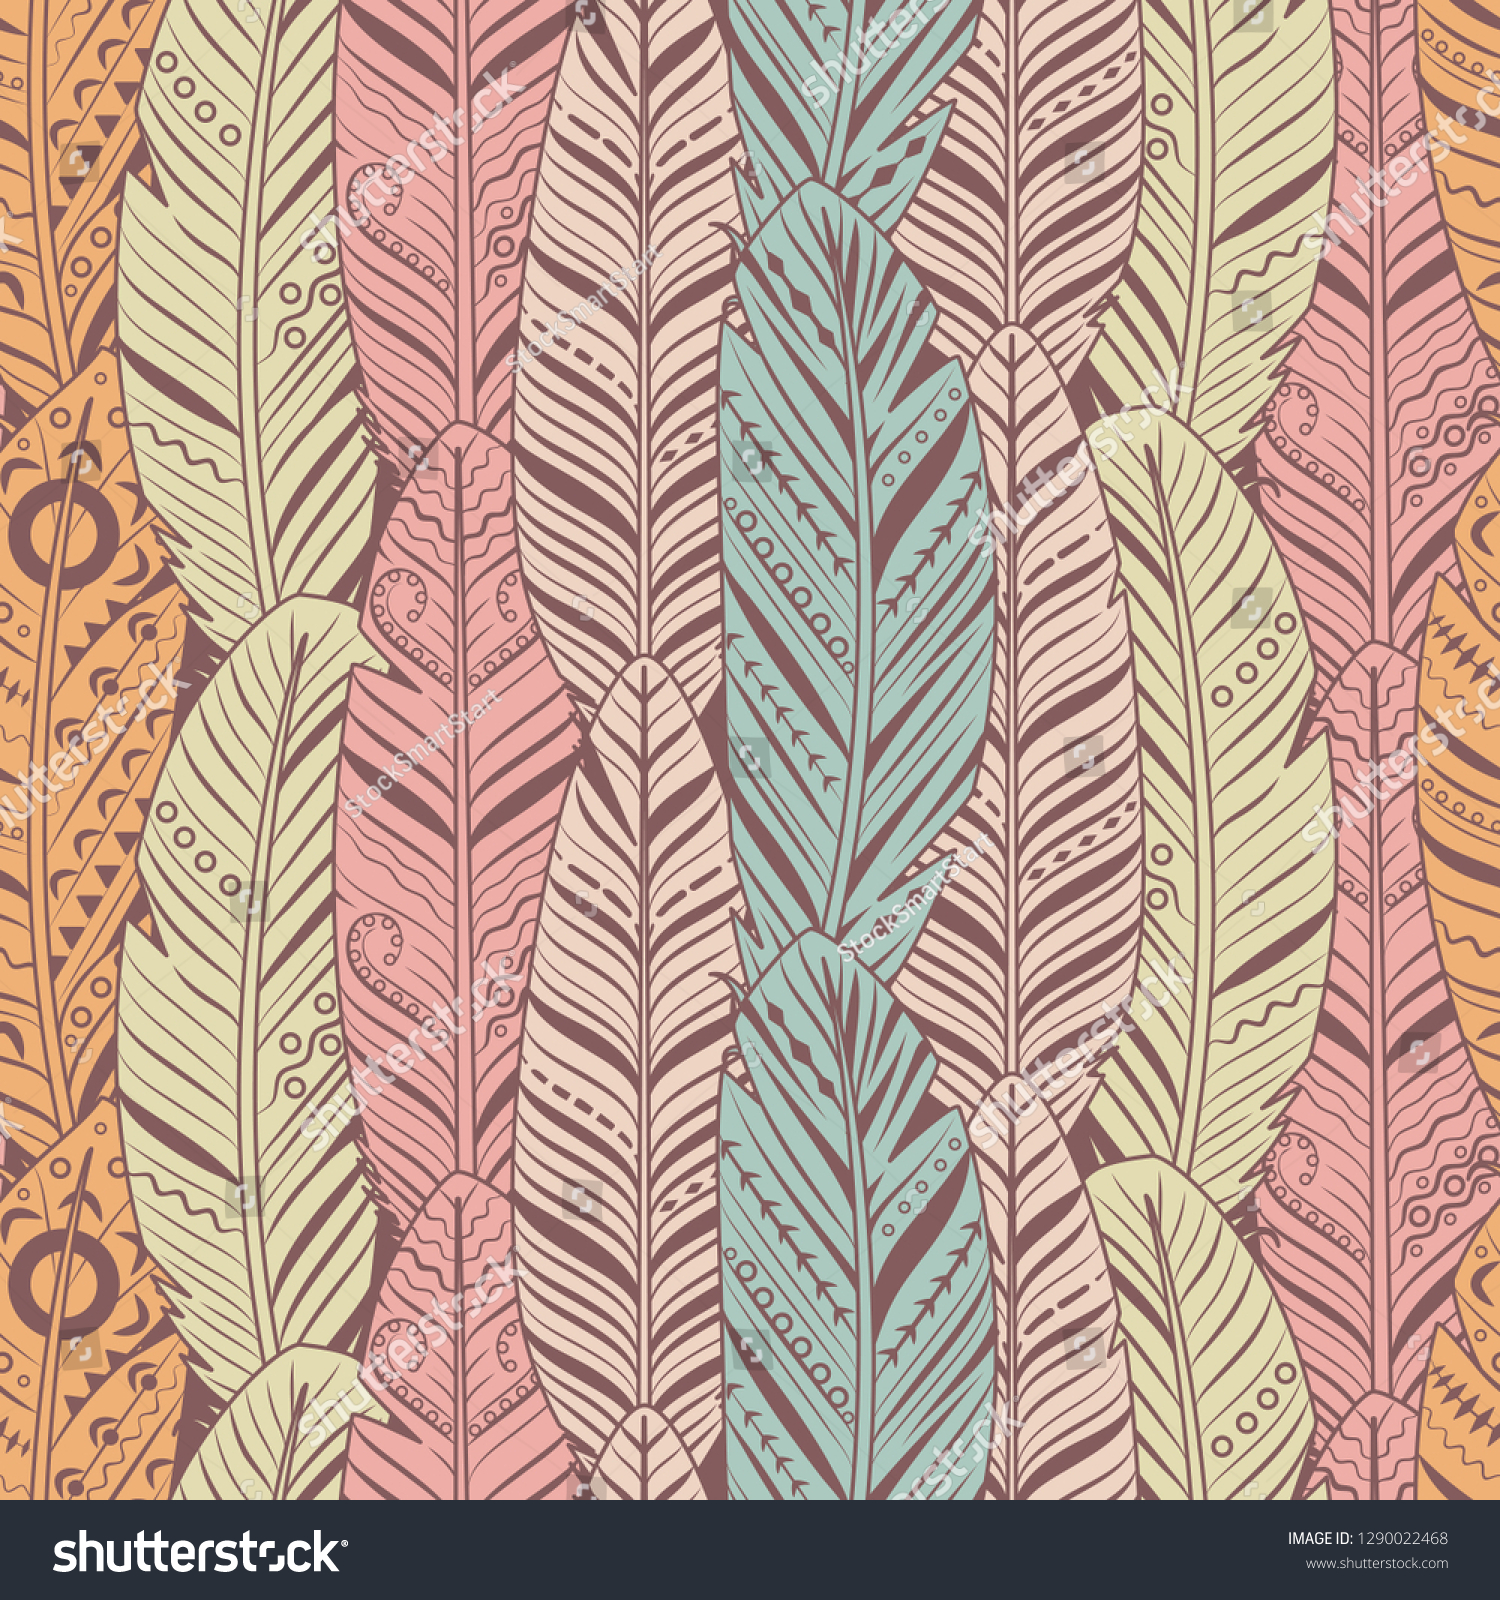 Hand Drawn Feathers Seamless Pattern Vintage Stock Vector Royalty